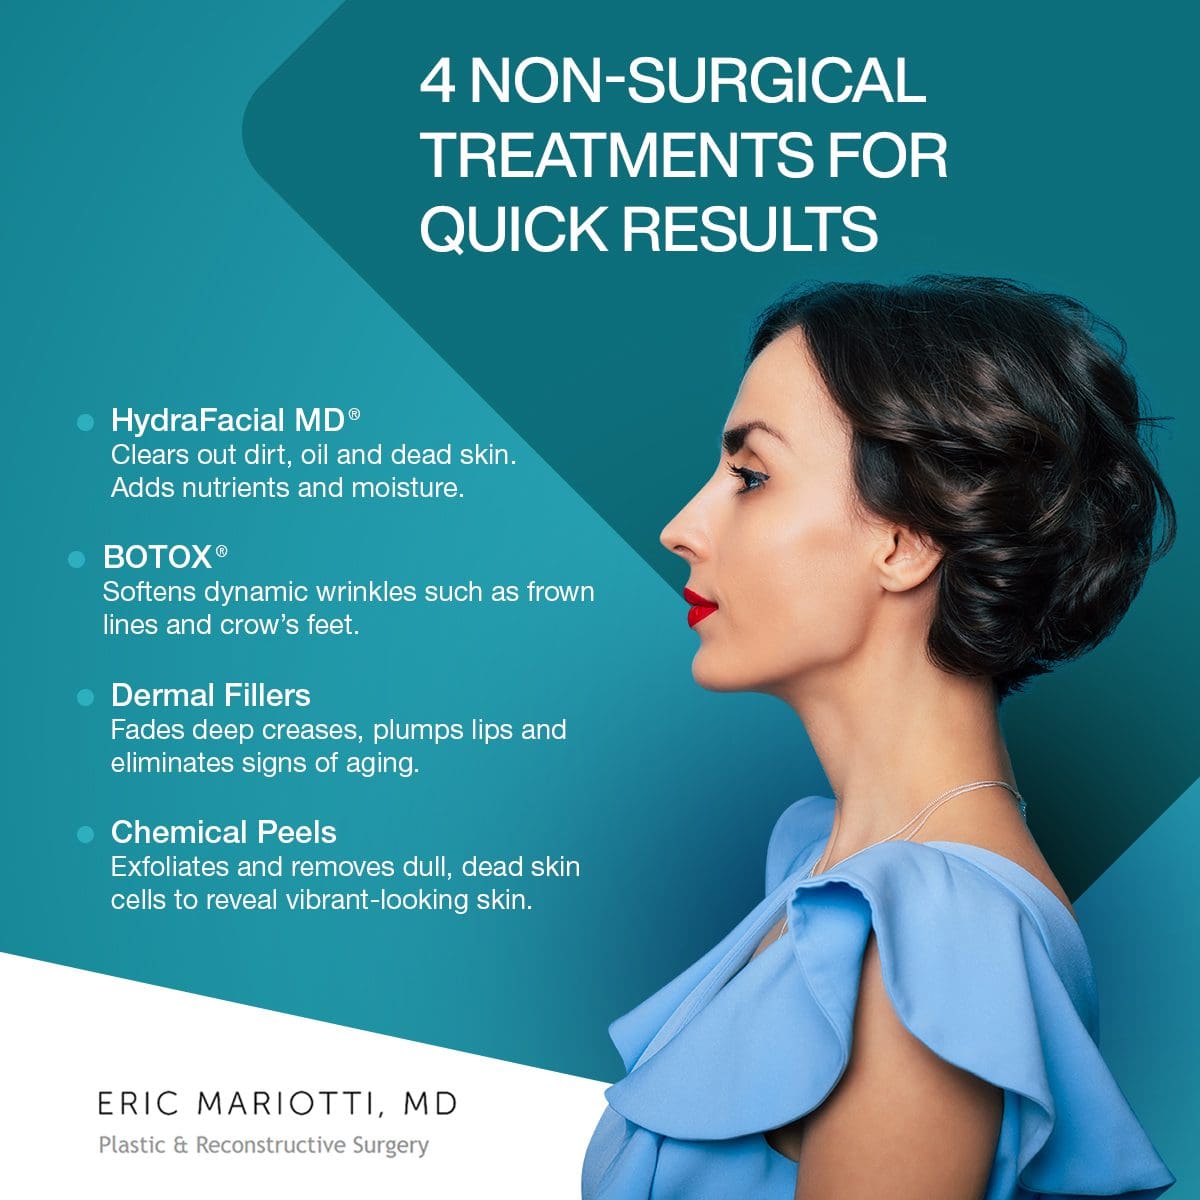 4 Non-Surgical Treatments for Quick Results